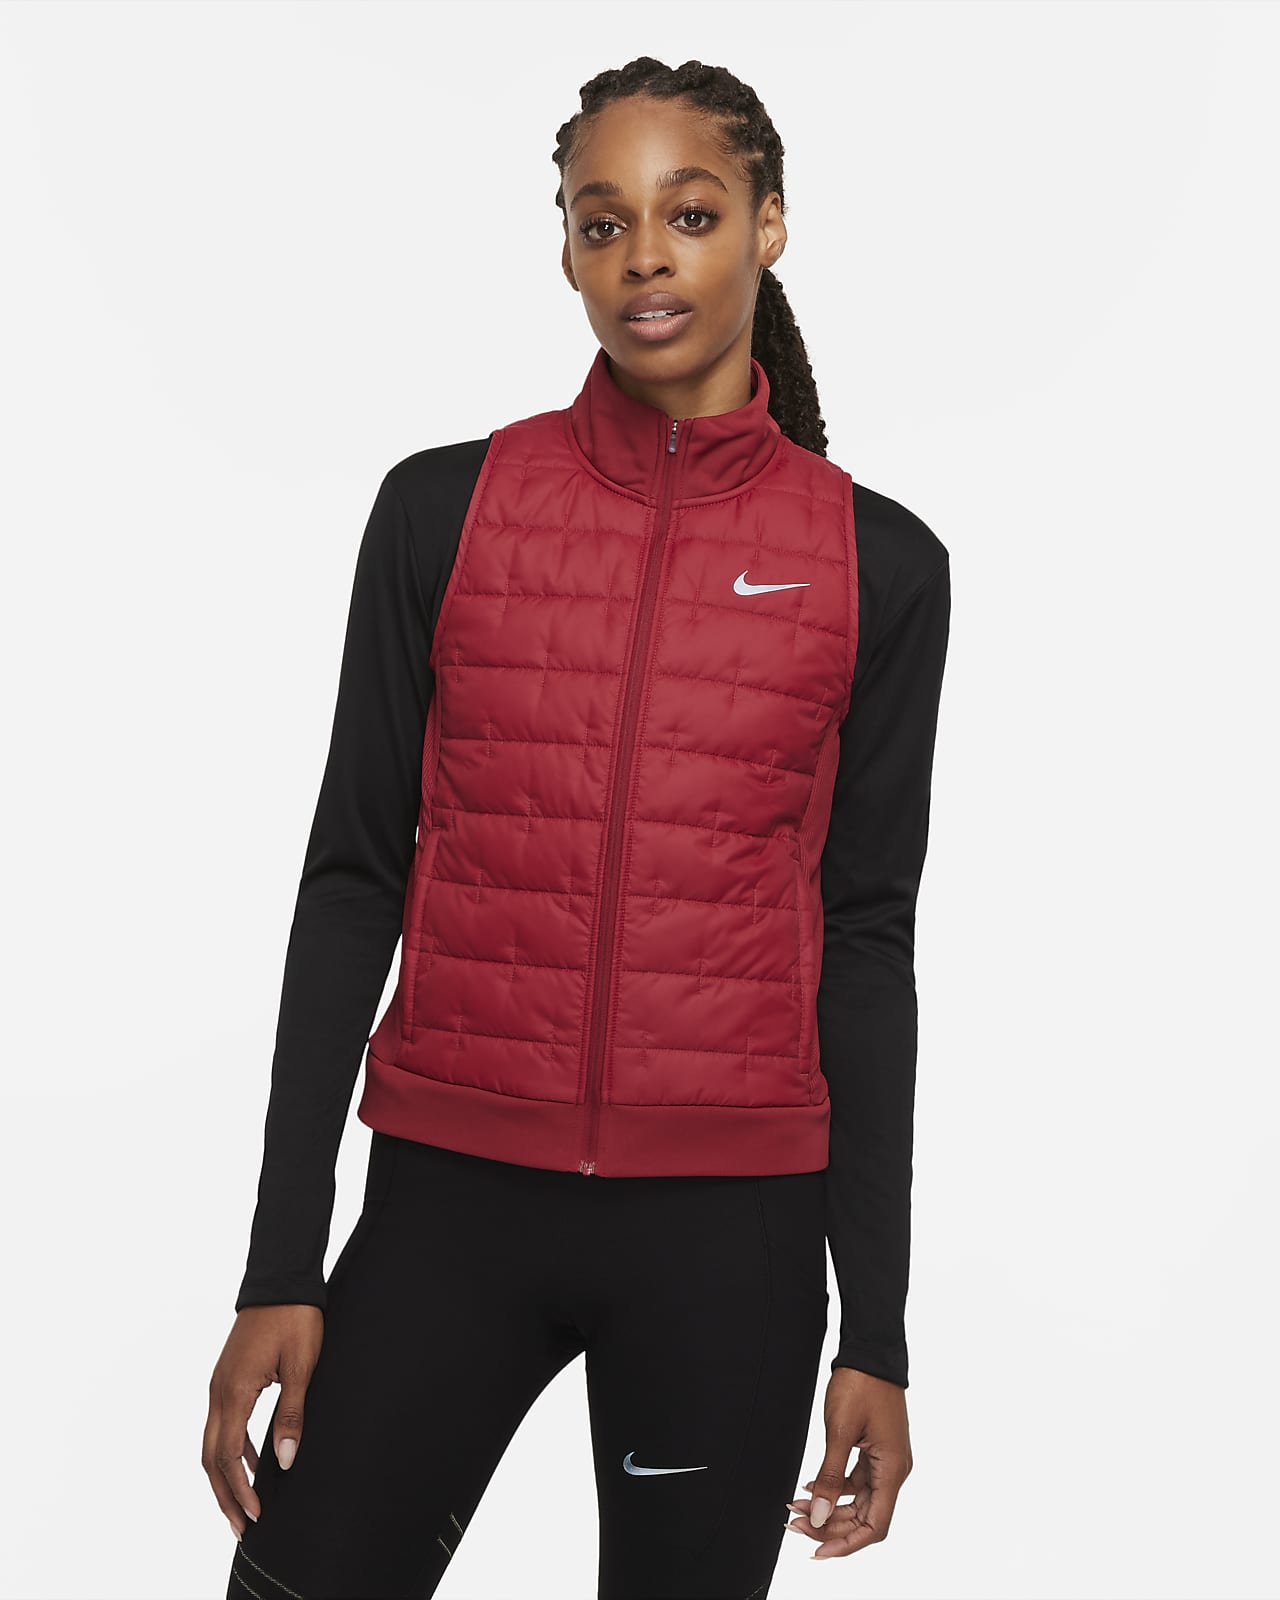 Chaleco de running con relleno sintético para mujer  Nike Therma-FIT